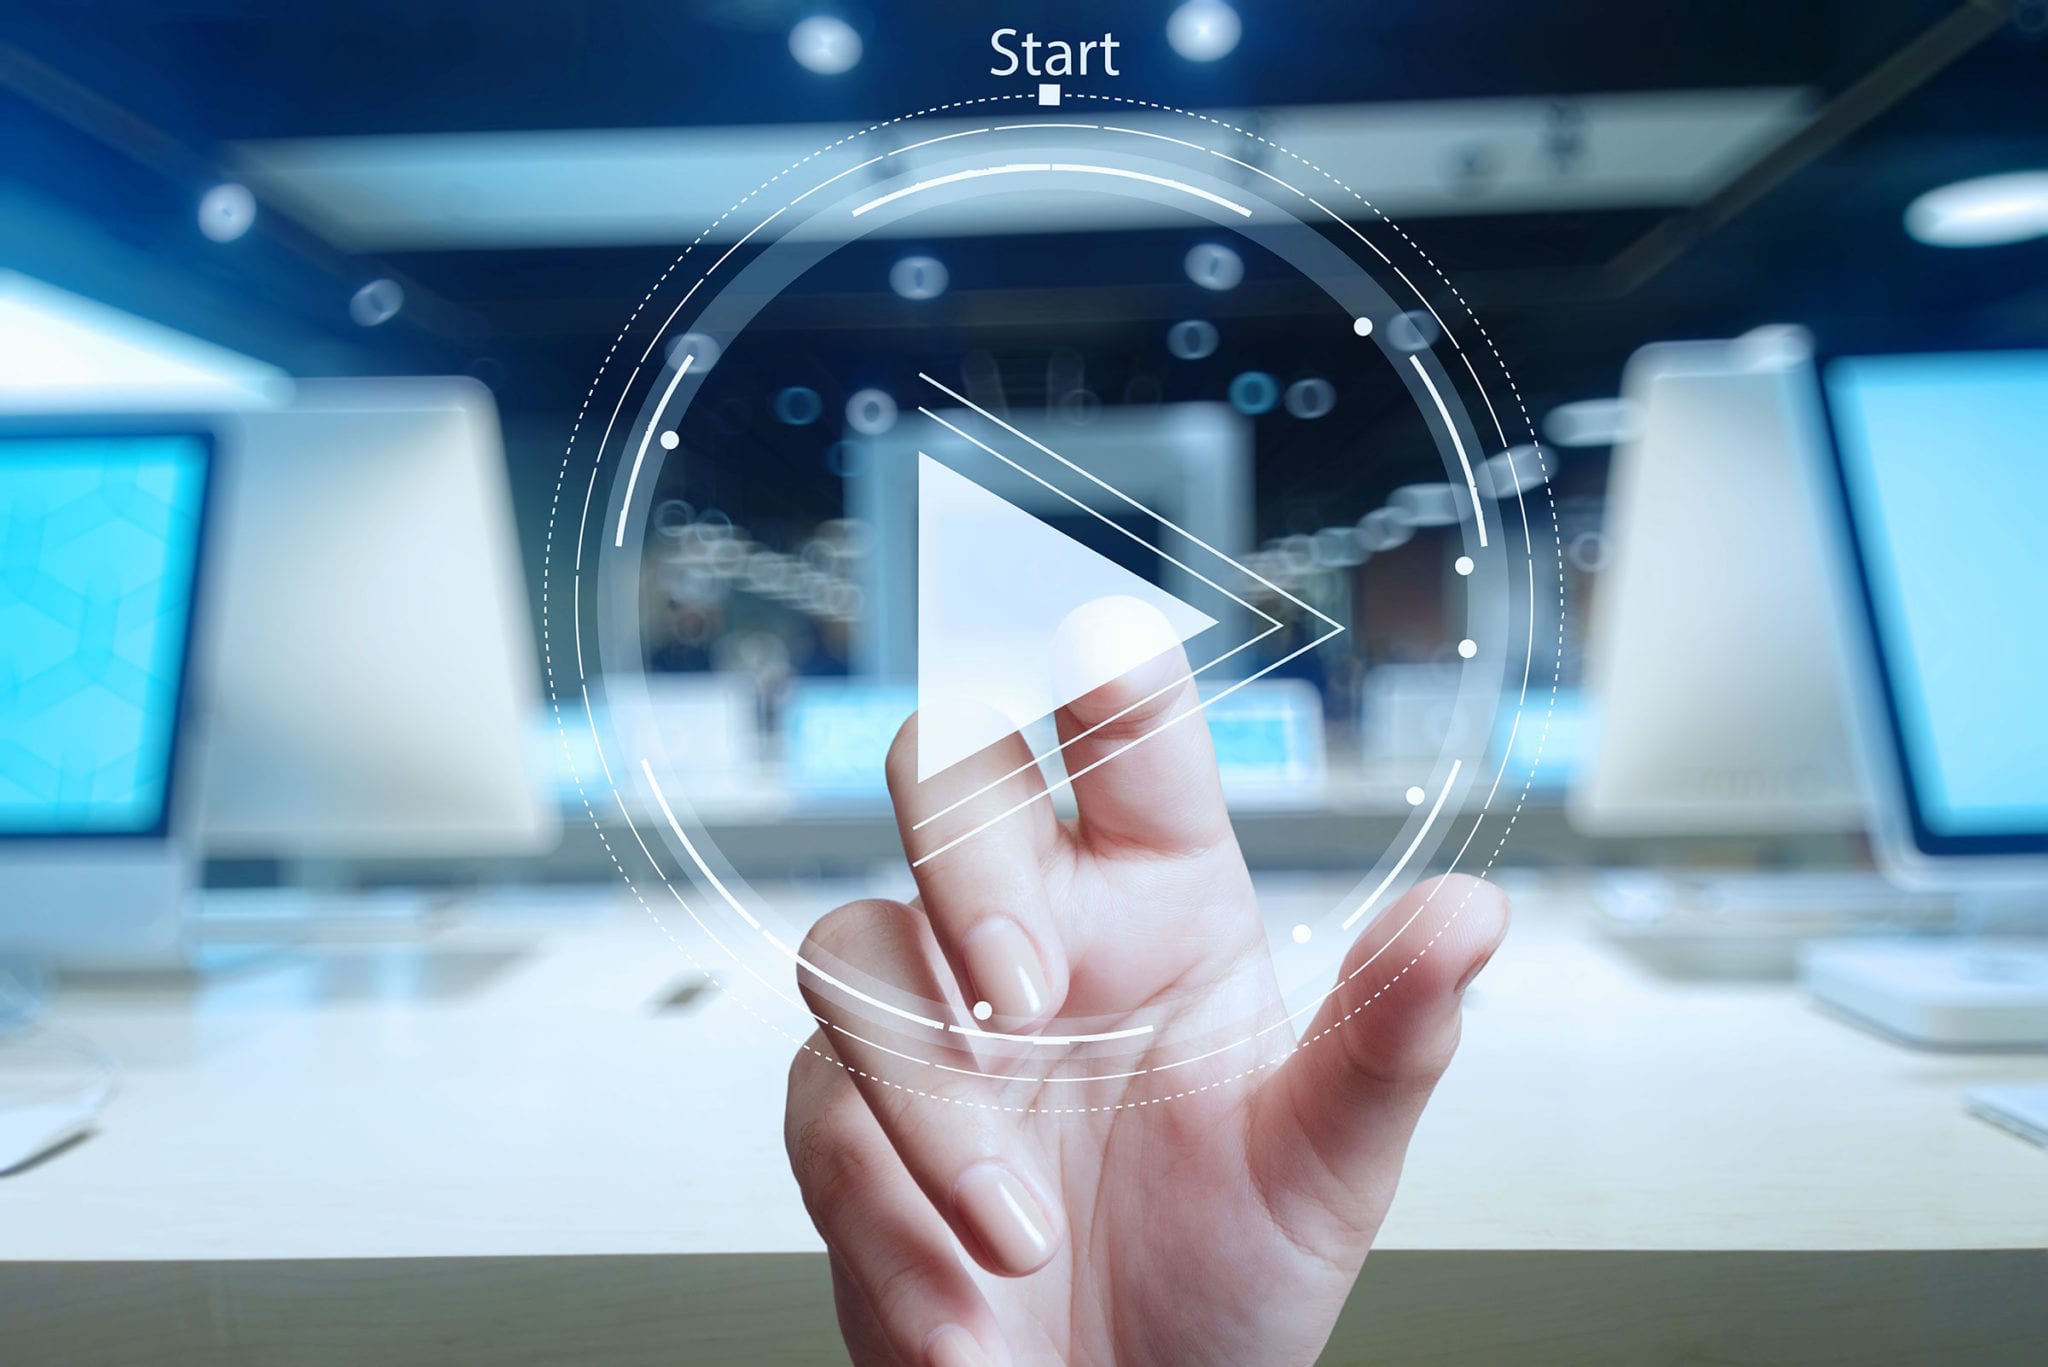 Tips For Skyrocketing Your Sales Through Video Marketing